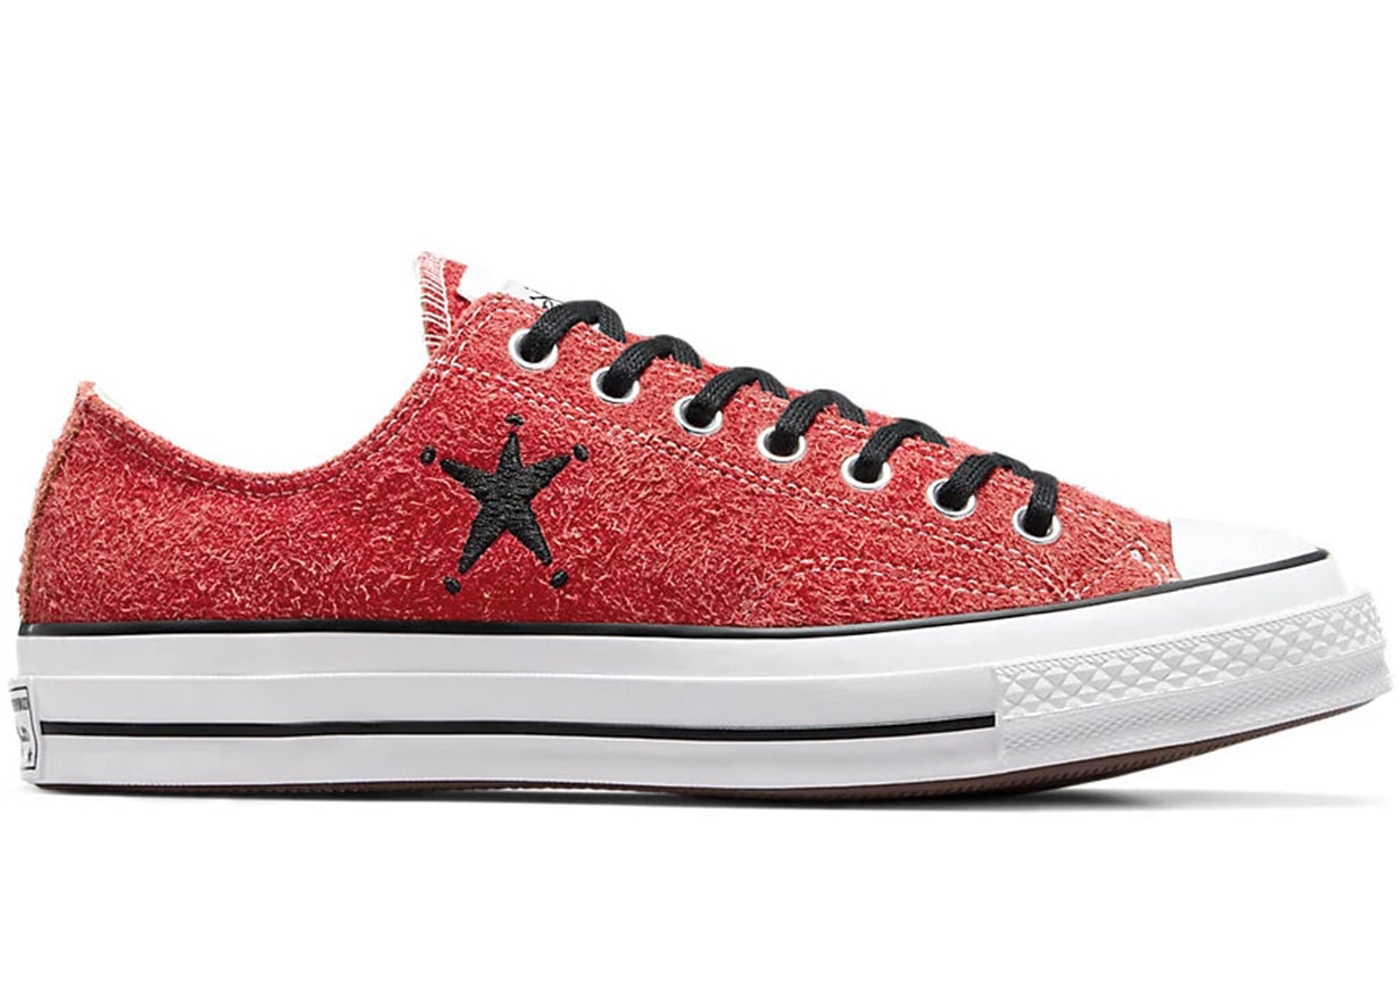 Converse Chuck Taylor All Star 70 Ox Stussy Poppy Red